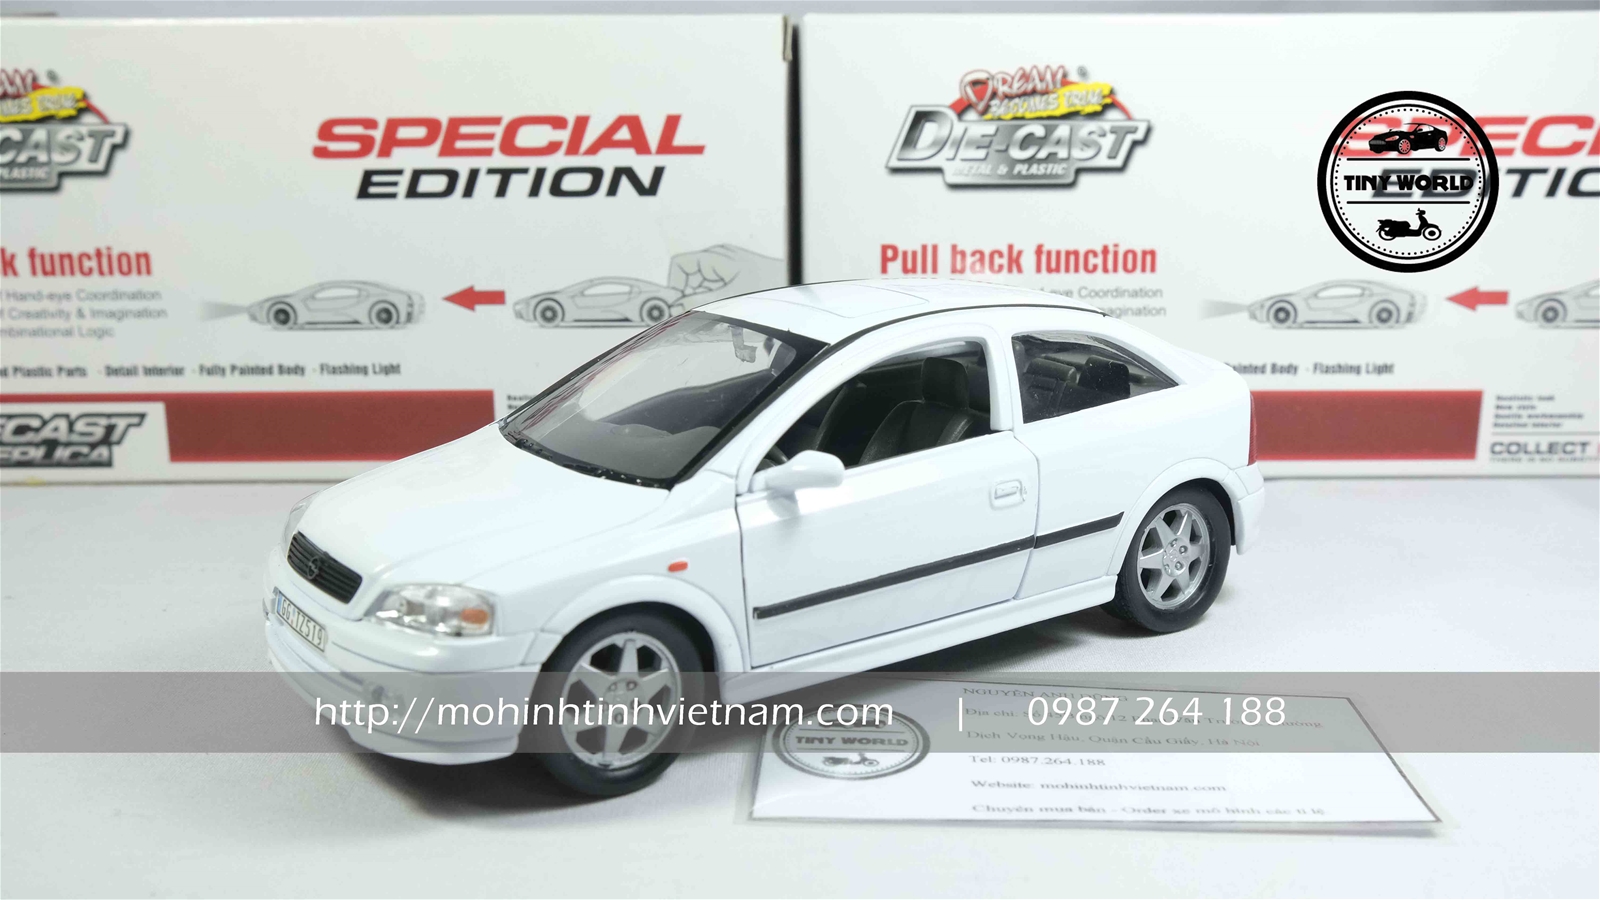 OPEL ASTRA 2000 (TRẮNG) 1:24 WELLY